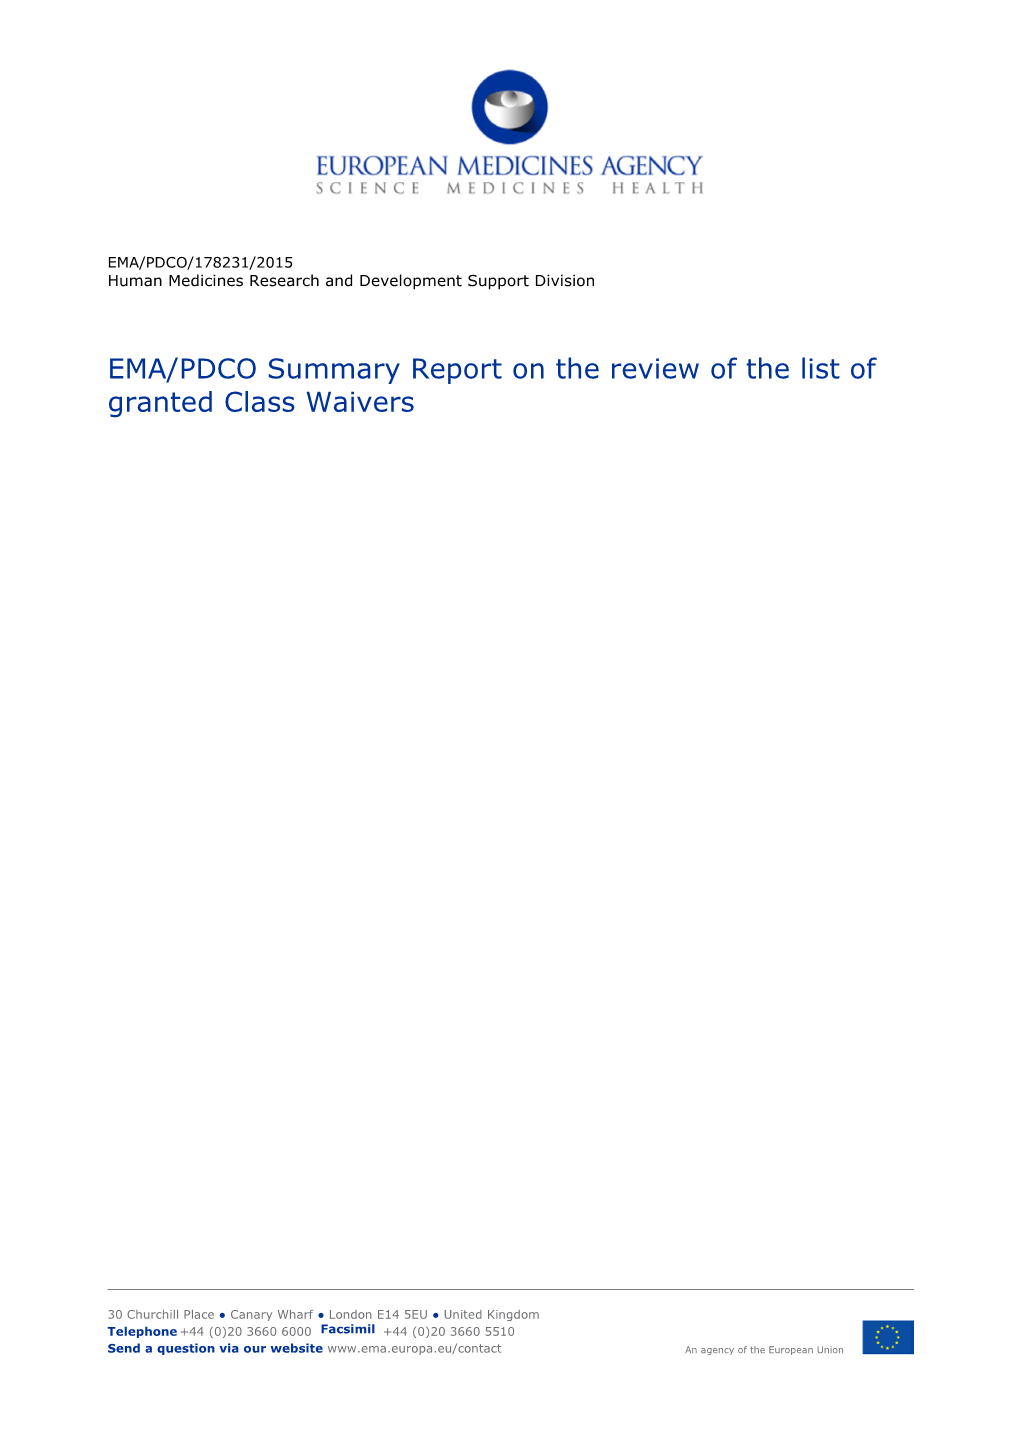 EMA/PDCO Summary Report on the Review of the List of Granted Class Waivers